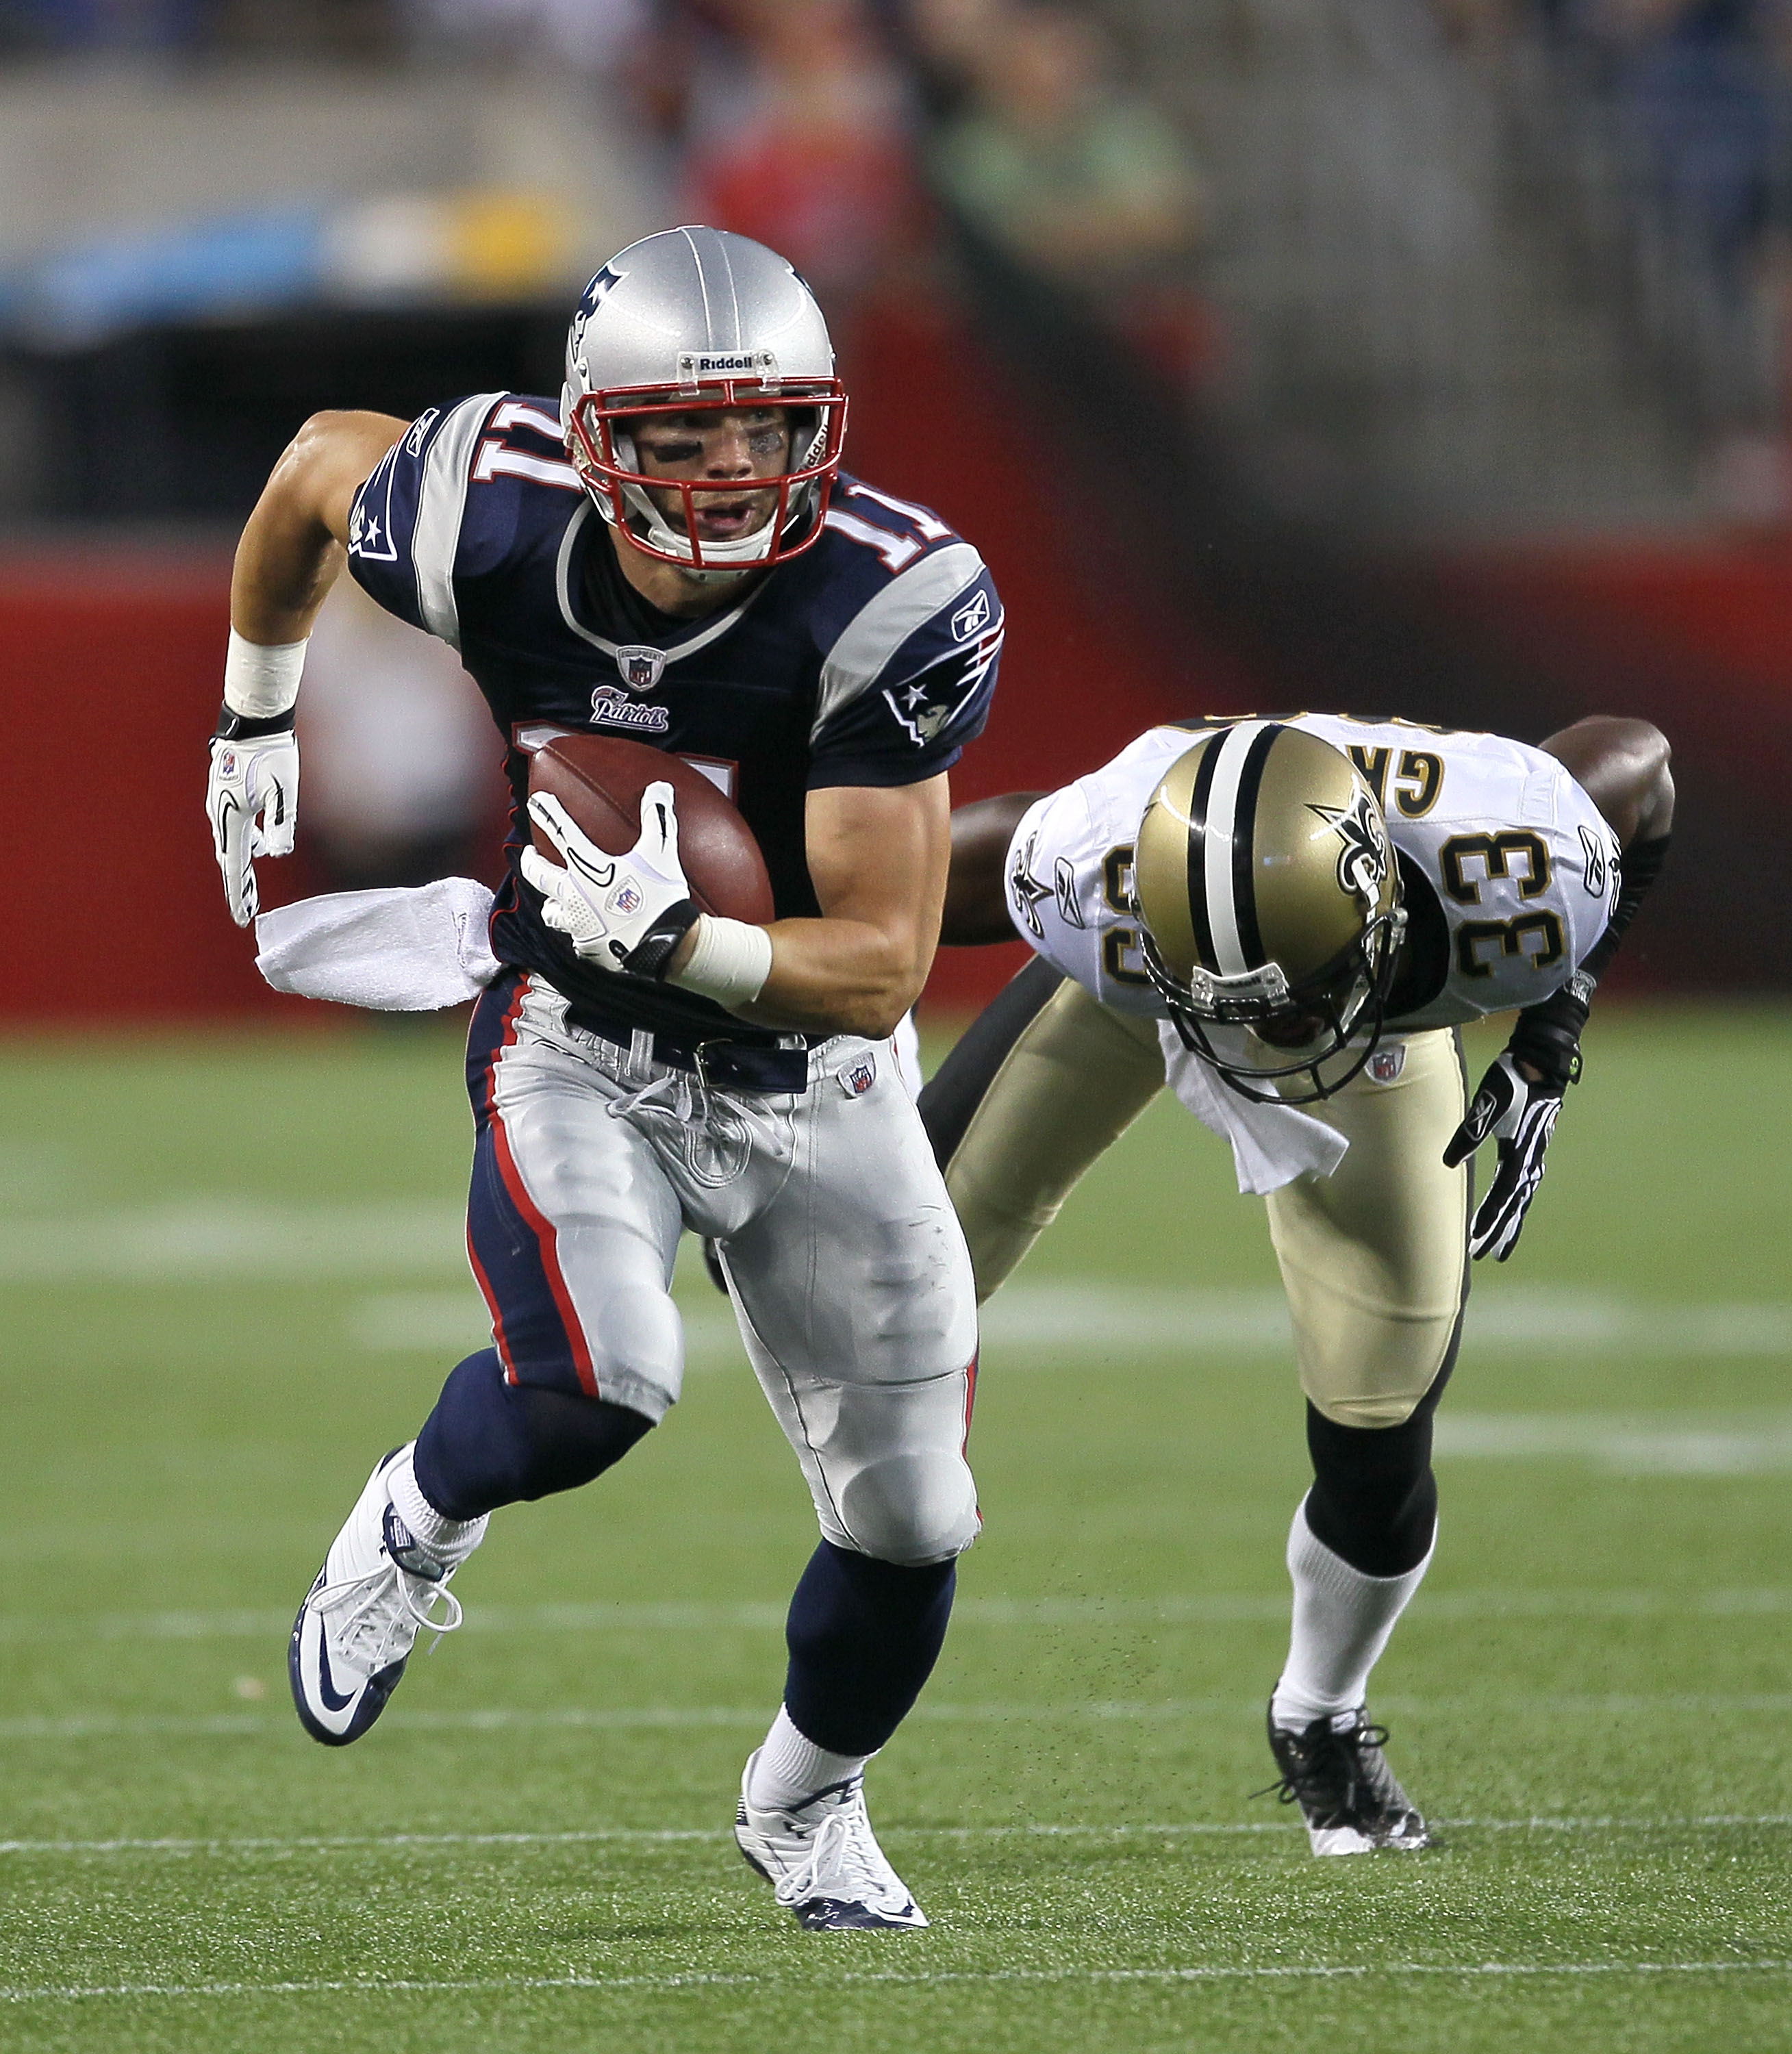 FOXBORO, MA - AUGUST 12: Julian Edelman # 11 of the New England Patriots gains yards against the defense of Jabari Greer # 33 of the New Orlean Saints during the preseason at Gillette Stadium on August 12, 2010 in Foxboro, Massachusetts. (Photo by Jim Rog